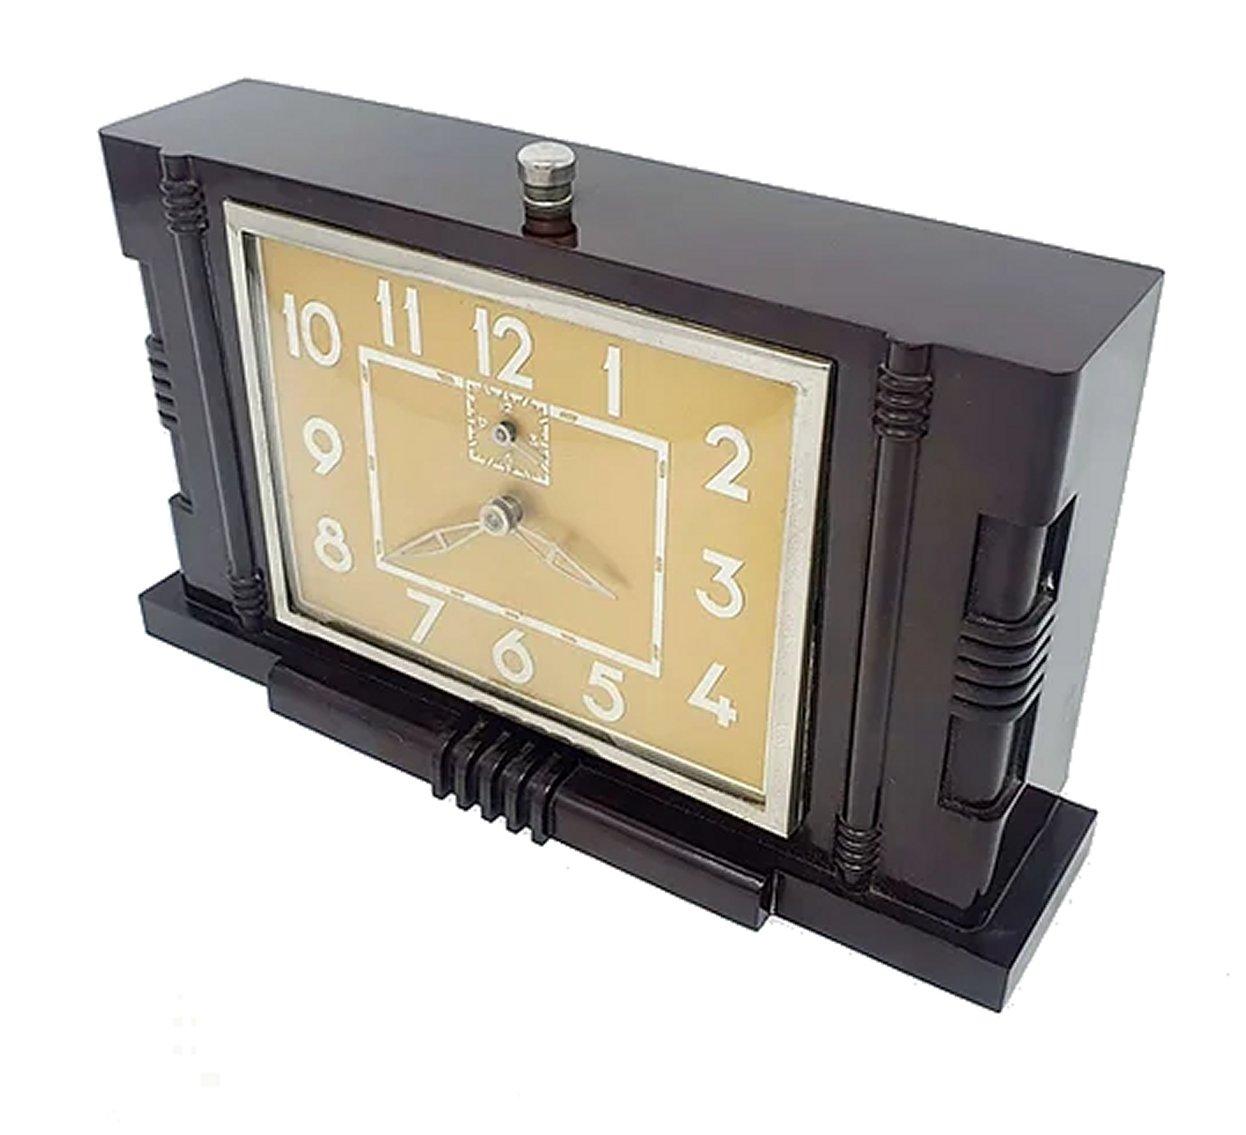 Impressive large 1930s Art Deco Bakelite table/ mantle clock by the French company Japy. Great geometric Bakelite case and numerals. Keeping very good time. Alarm doesn't work unfortunately so time piece only. 30 hour movement. Case is in great